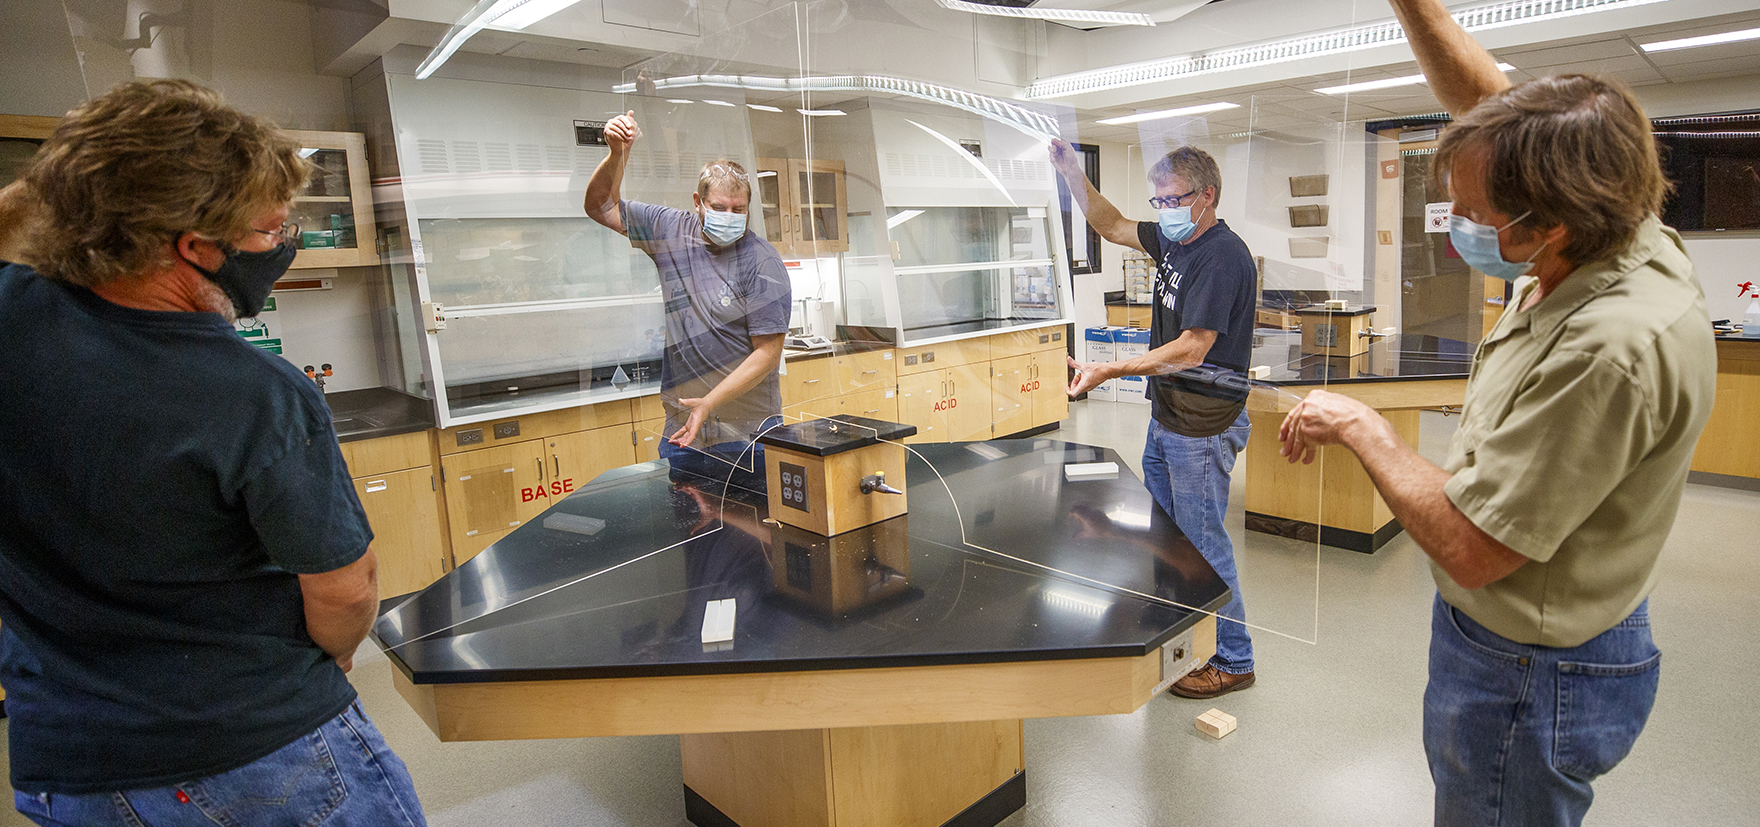 Staff and faculty installing clear barriers in laboratory